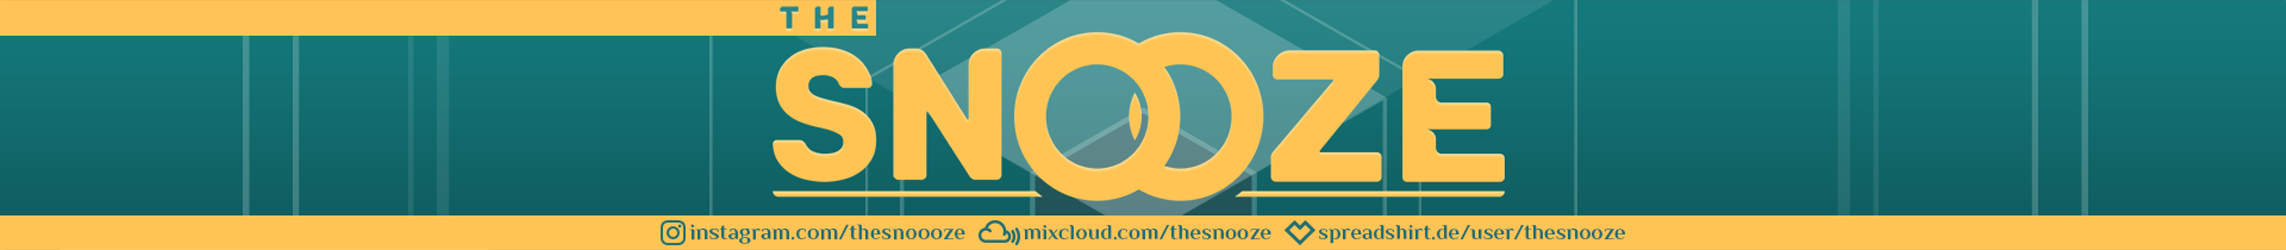 TheSnooze …'s profile banner